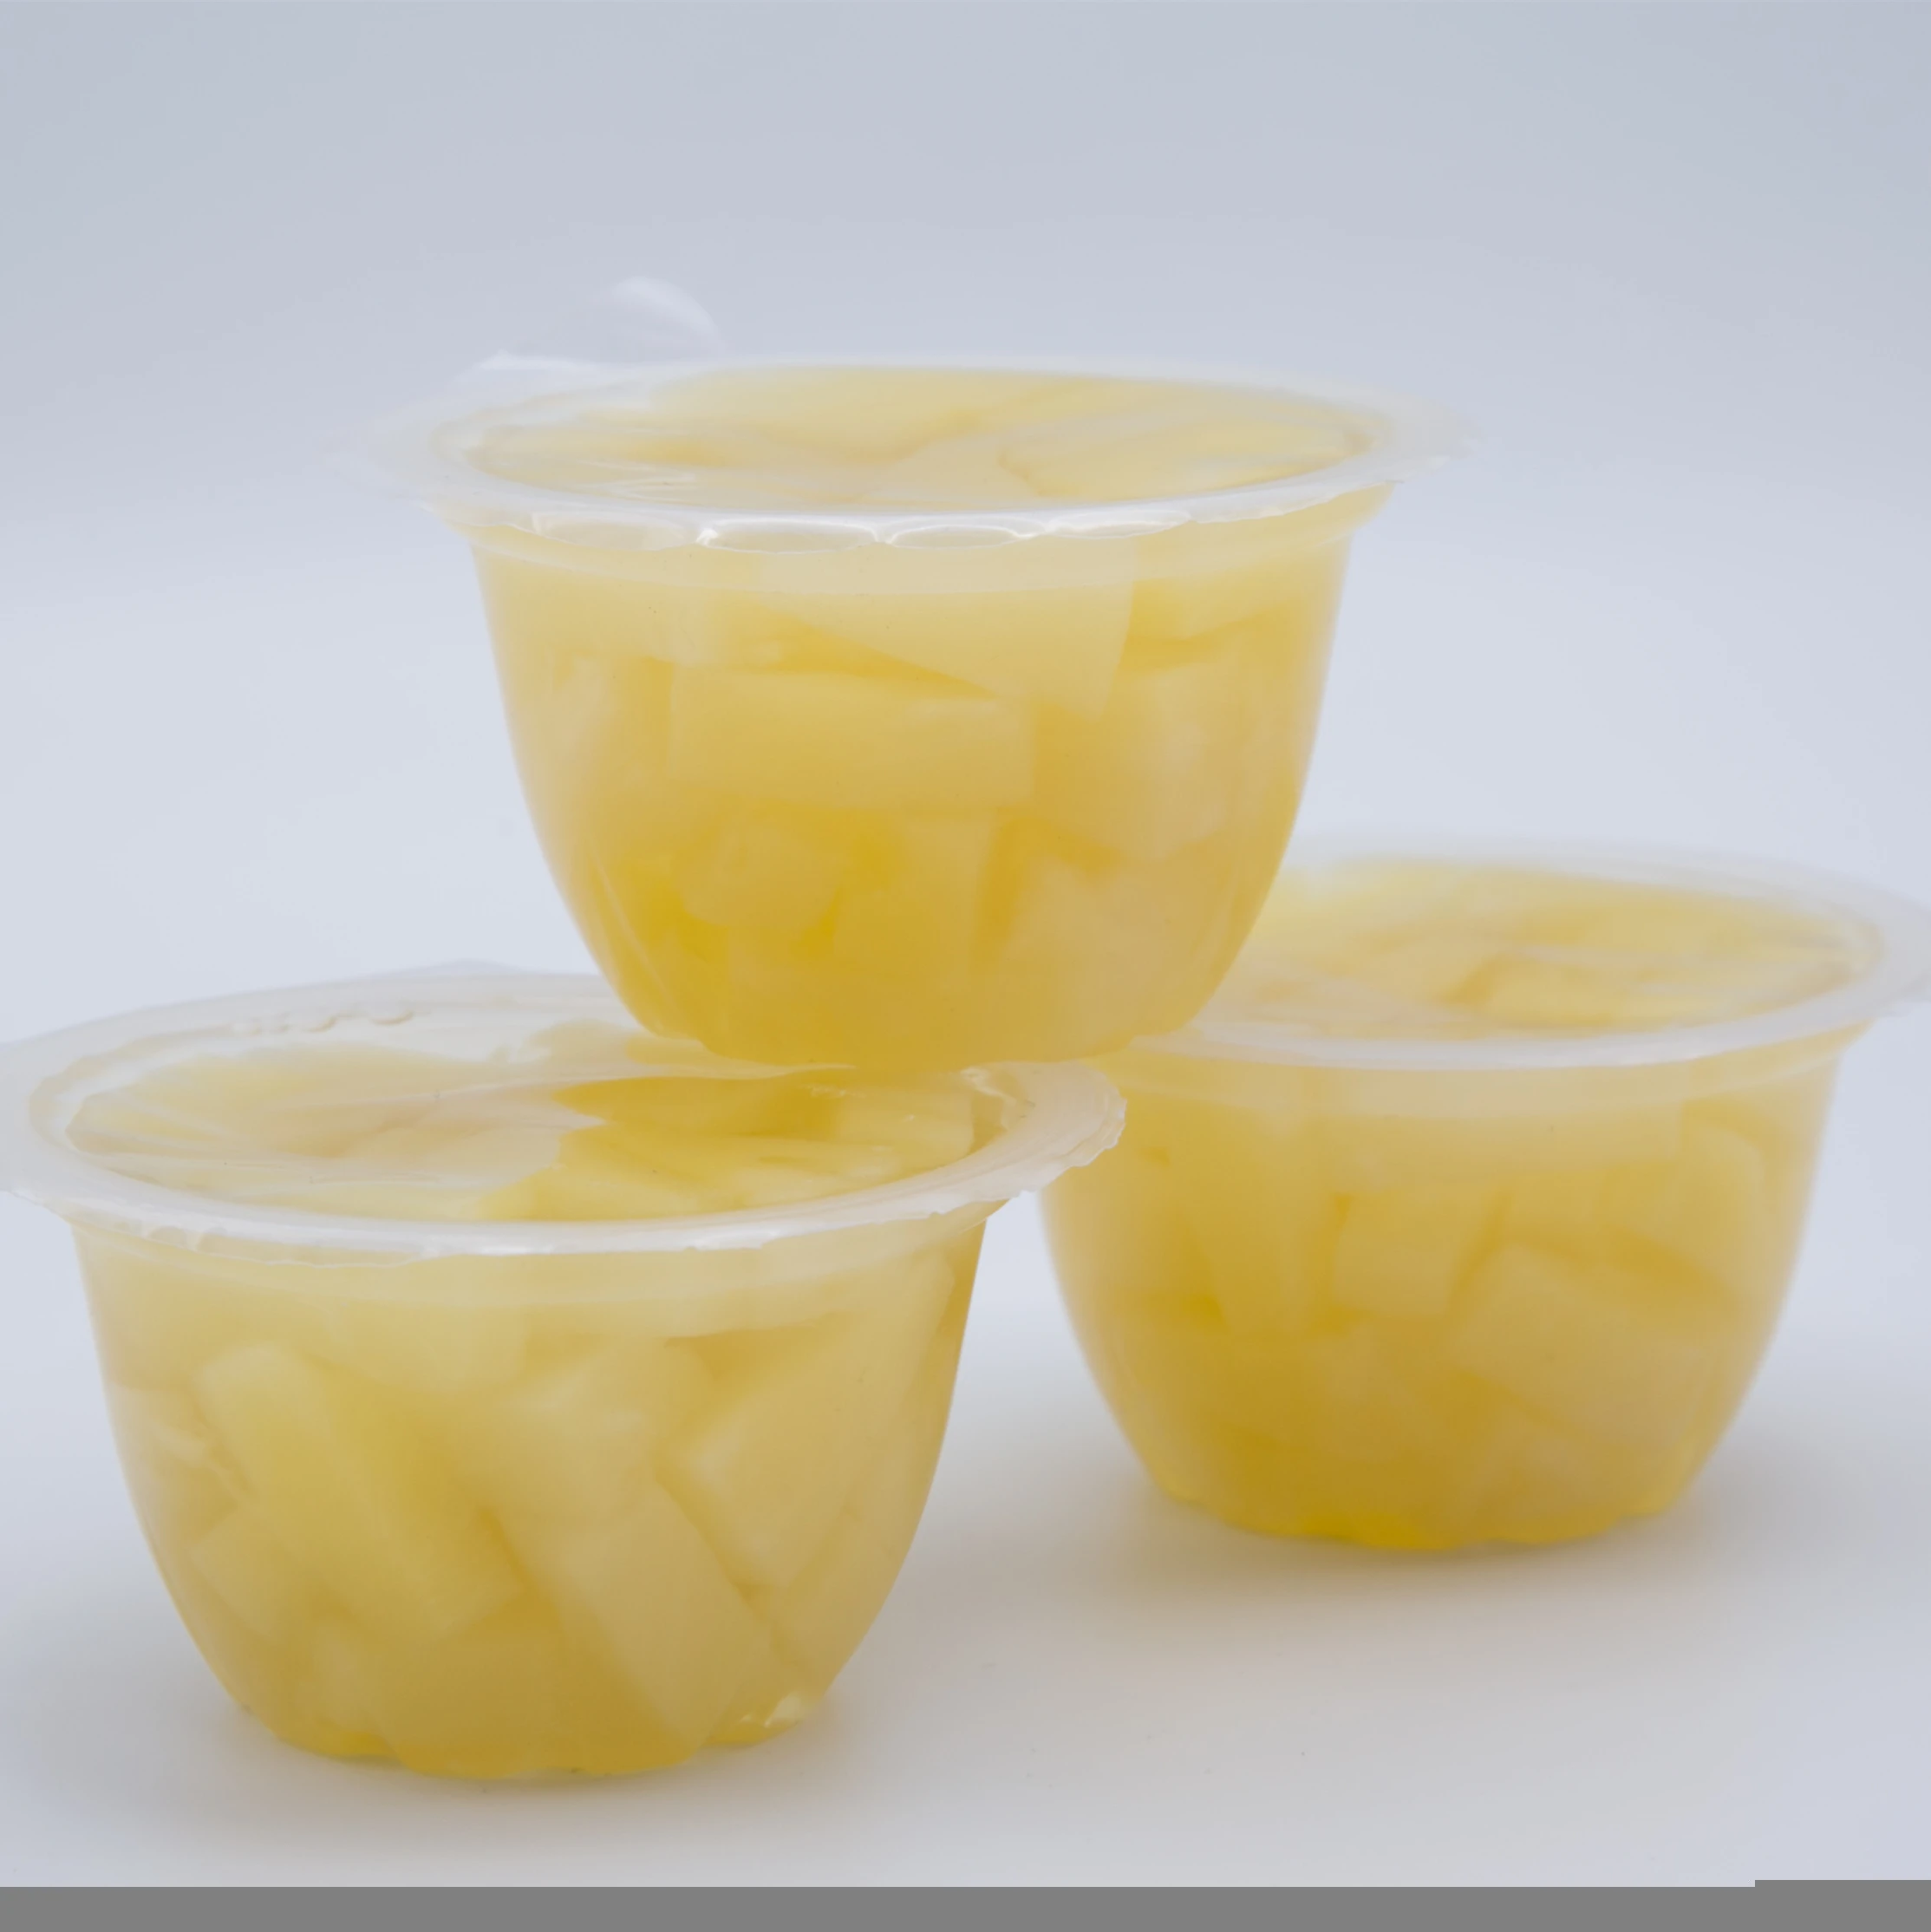 Canned plastic fruit cup